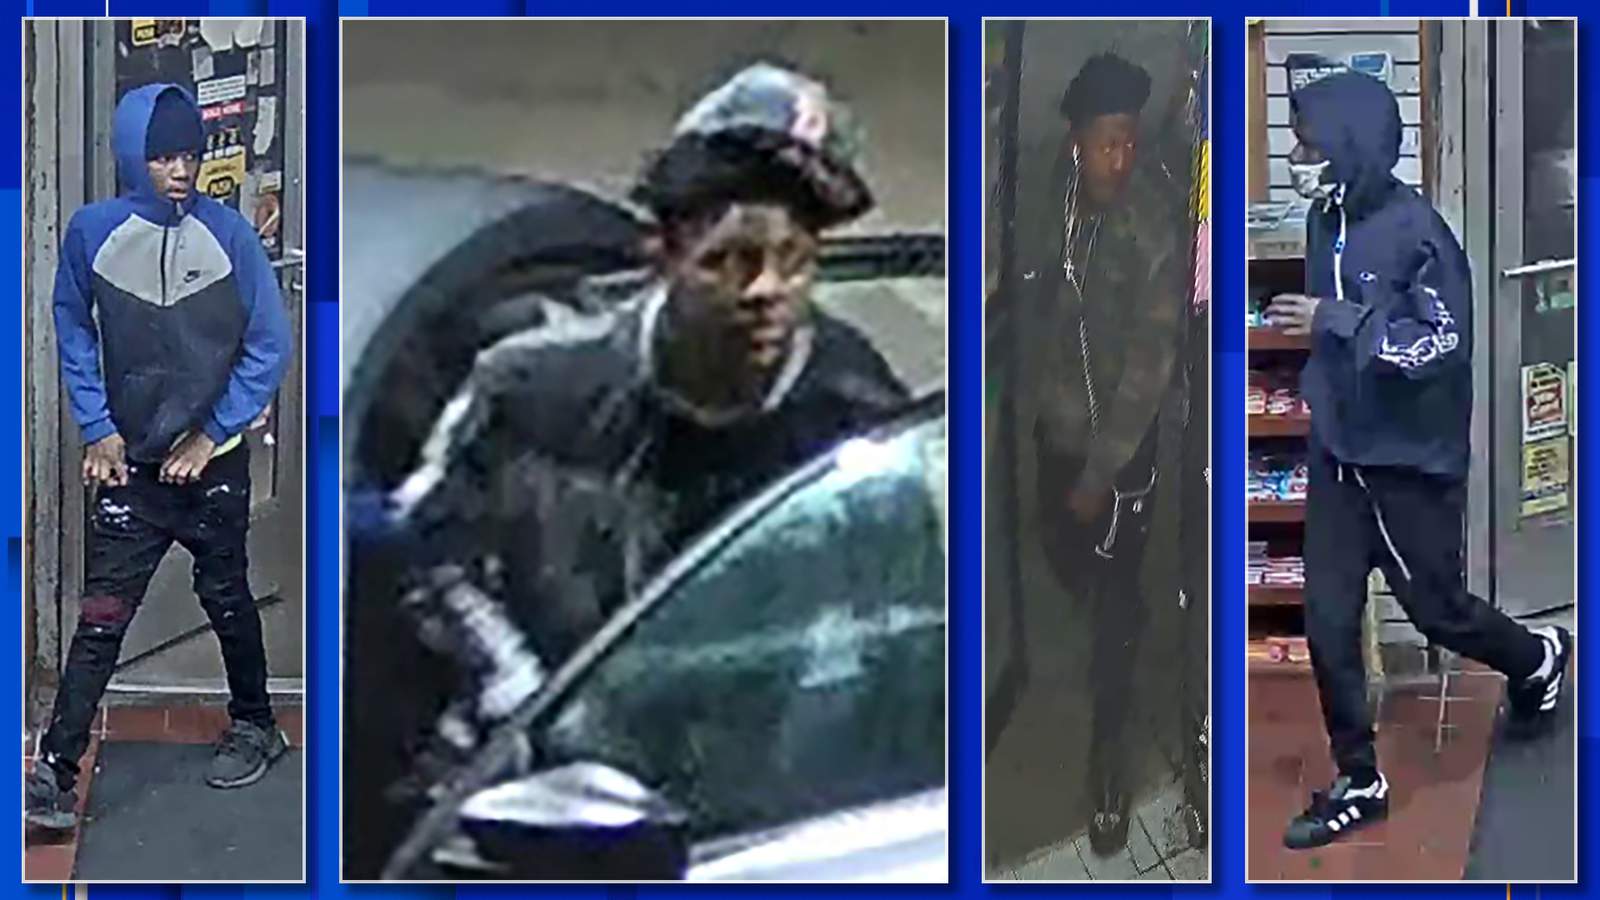 Detroit police seek 4 teens in connection with auto theft, carjacking